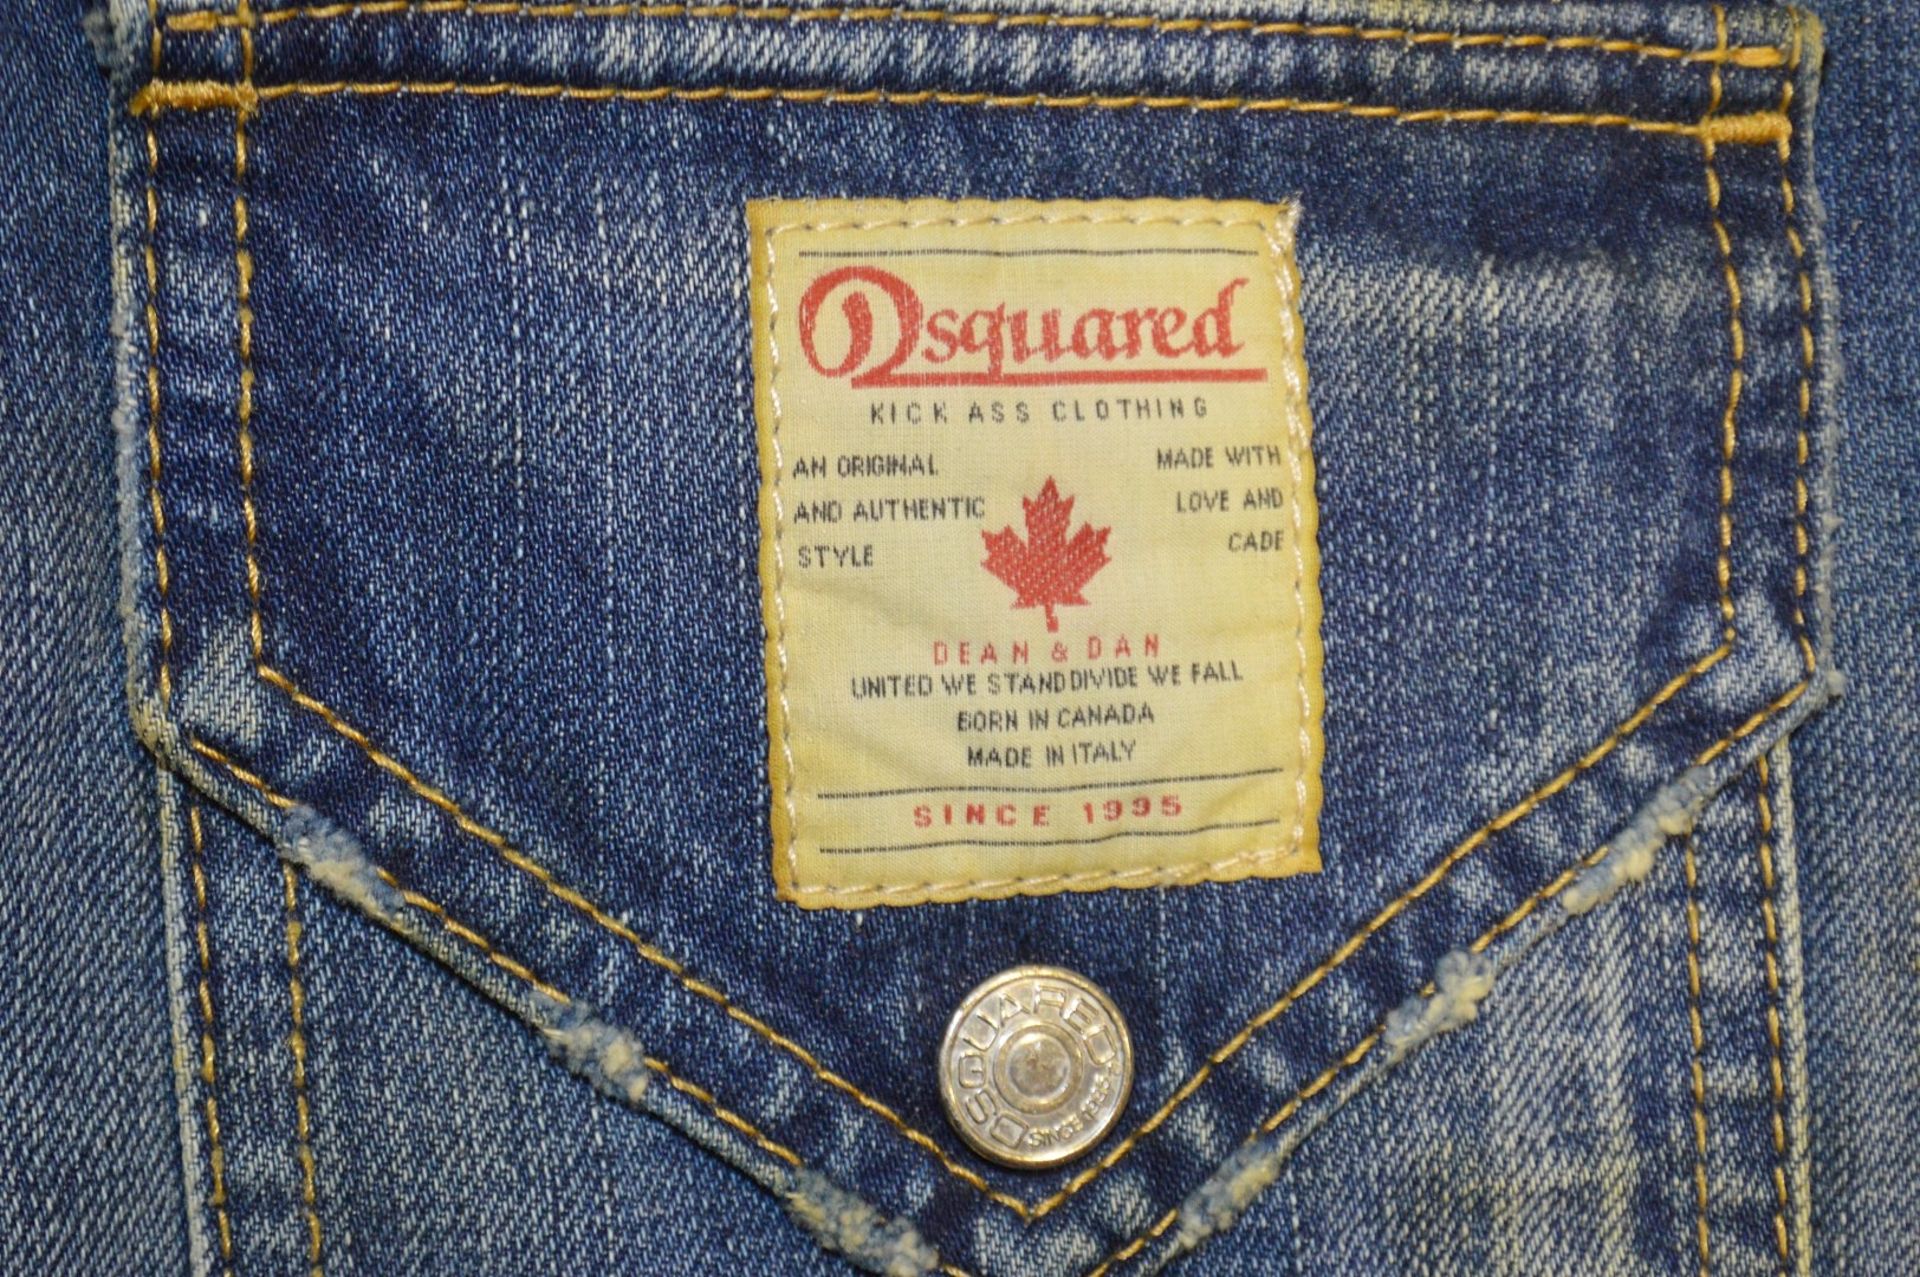 1 x Pair Of Men's Genuine Dsquared2 Distressed-Style Jeans Jeans In Dark Blue - Waist Size: UK30 - Image 6 of 9